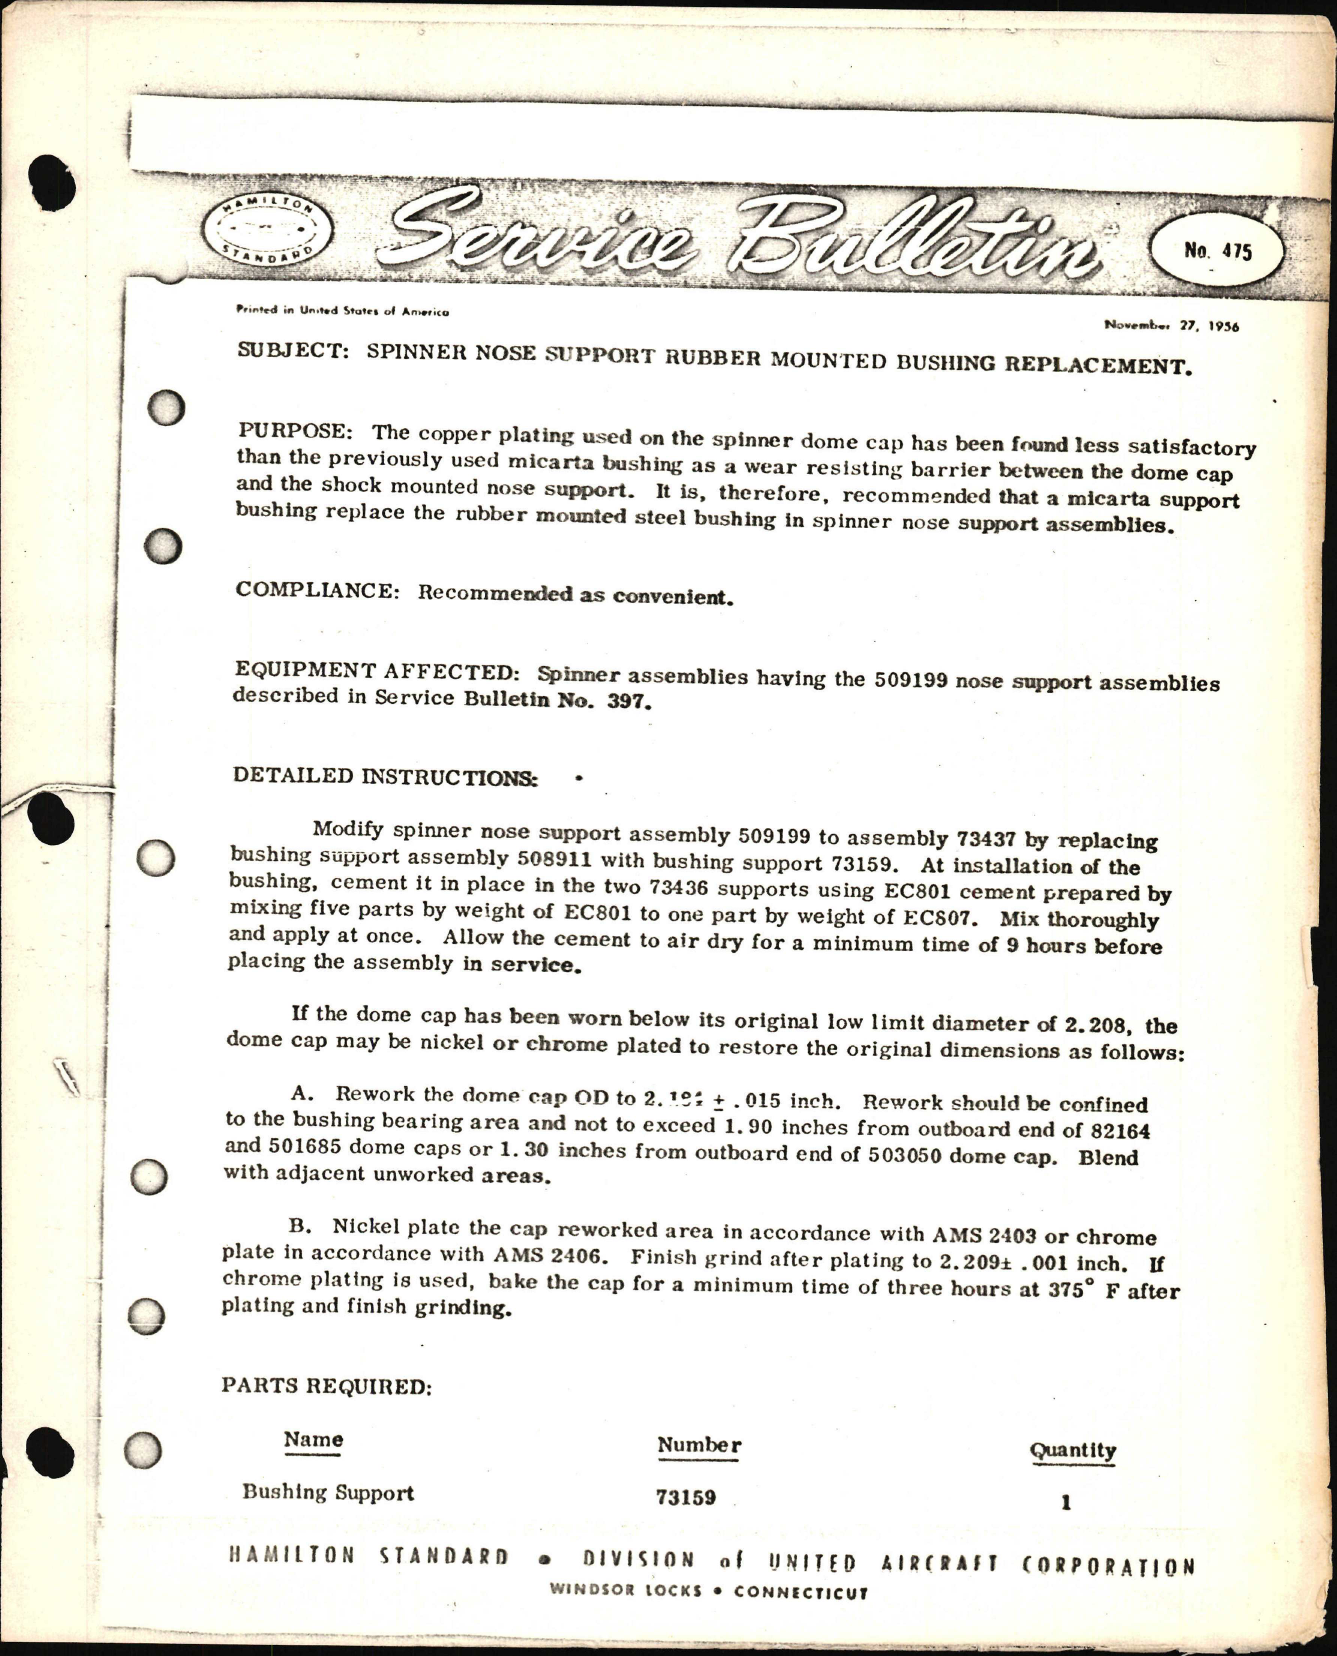 Sample page 1 from AirCorps Library document: Spinner Nose Support Rubber Mounted Bushing Replacement